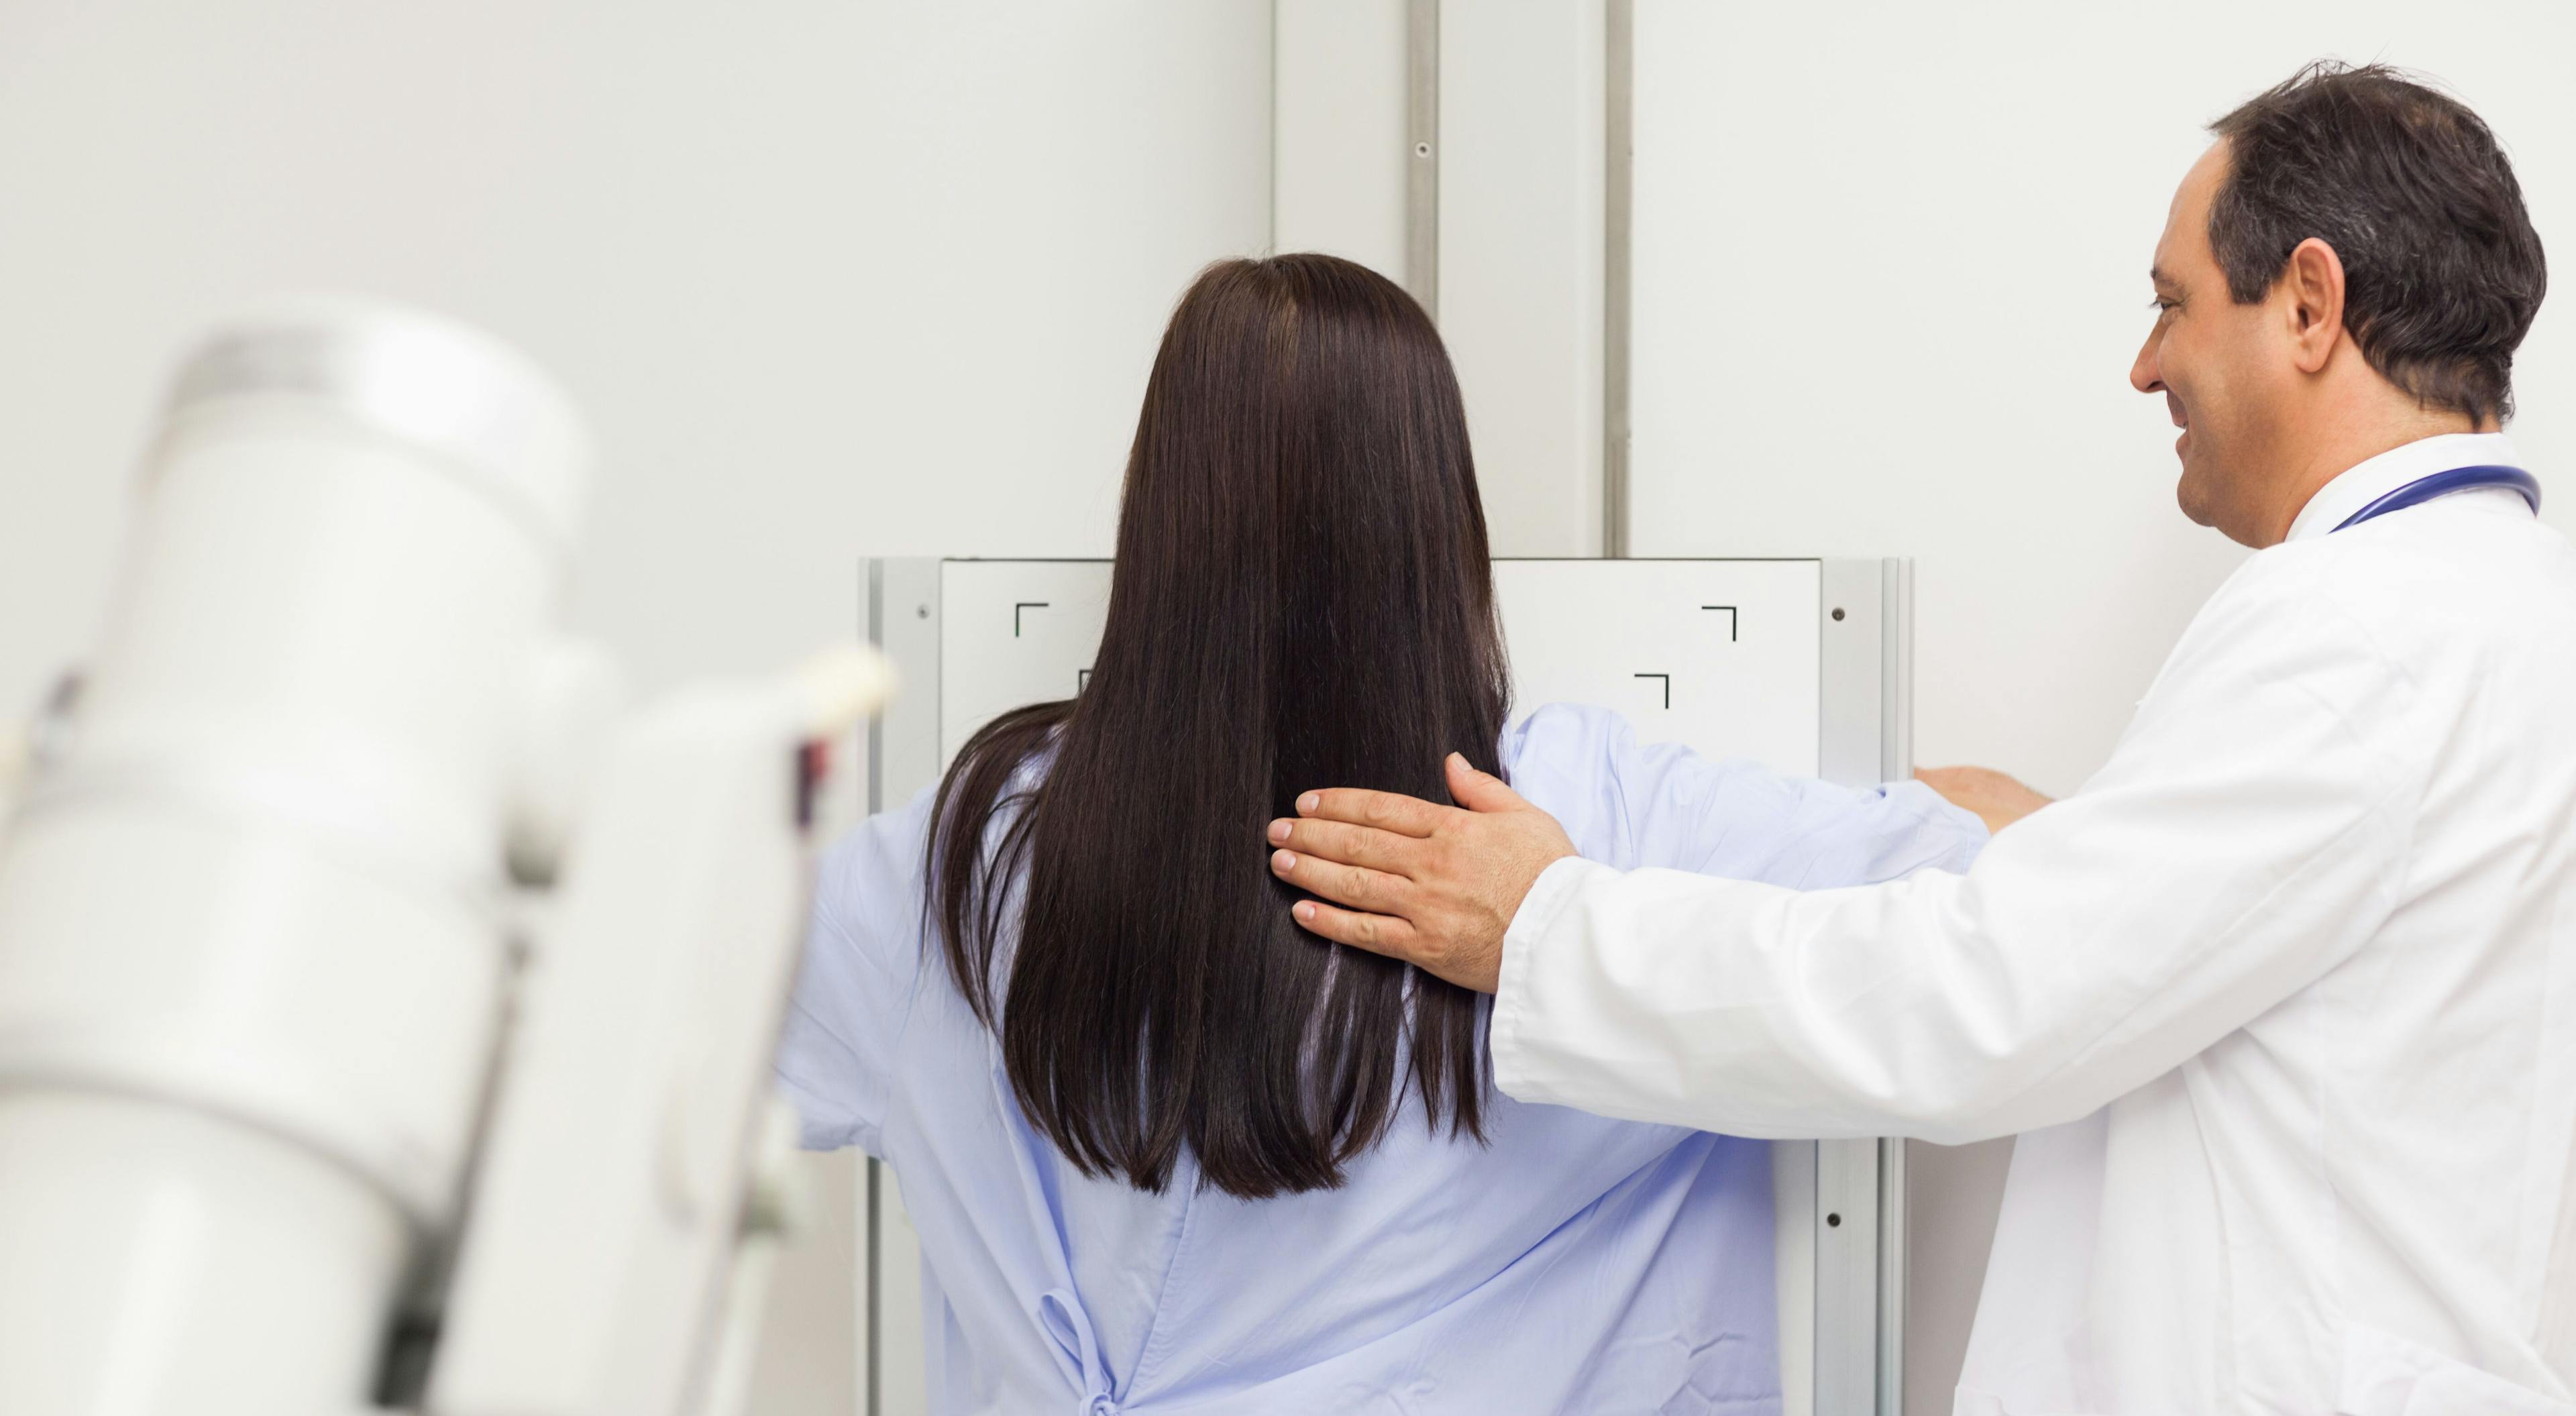 FDA Proposes Changes to Negate Mammogram Oversight